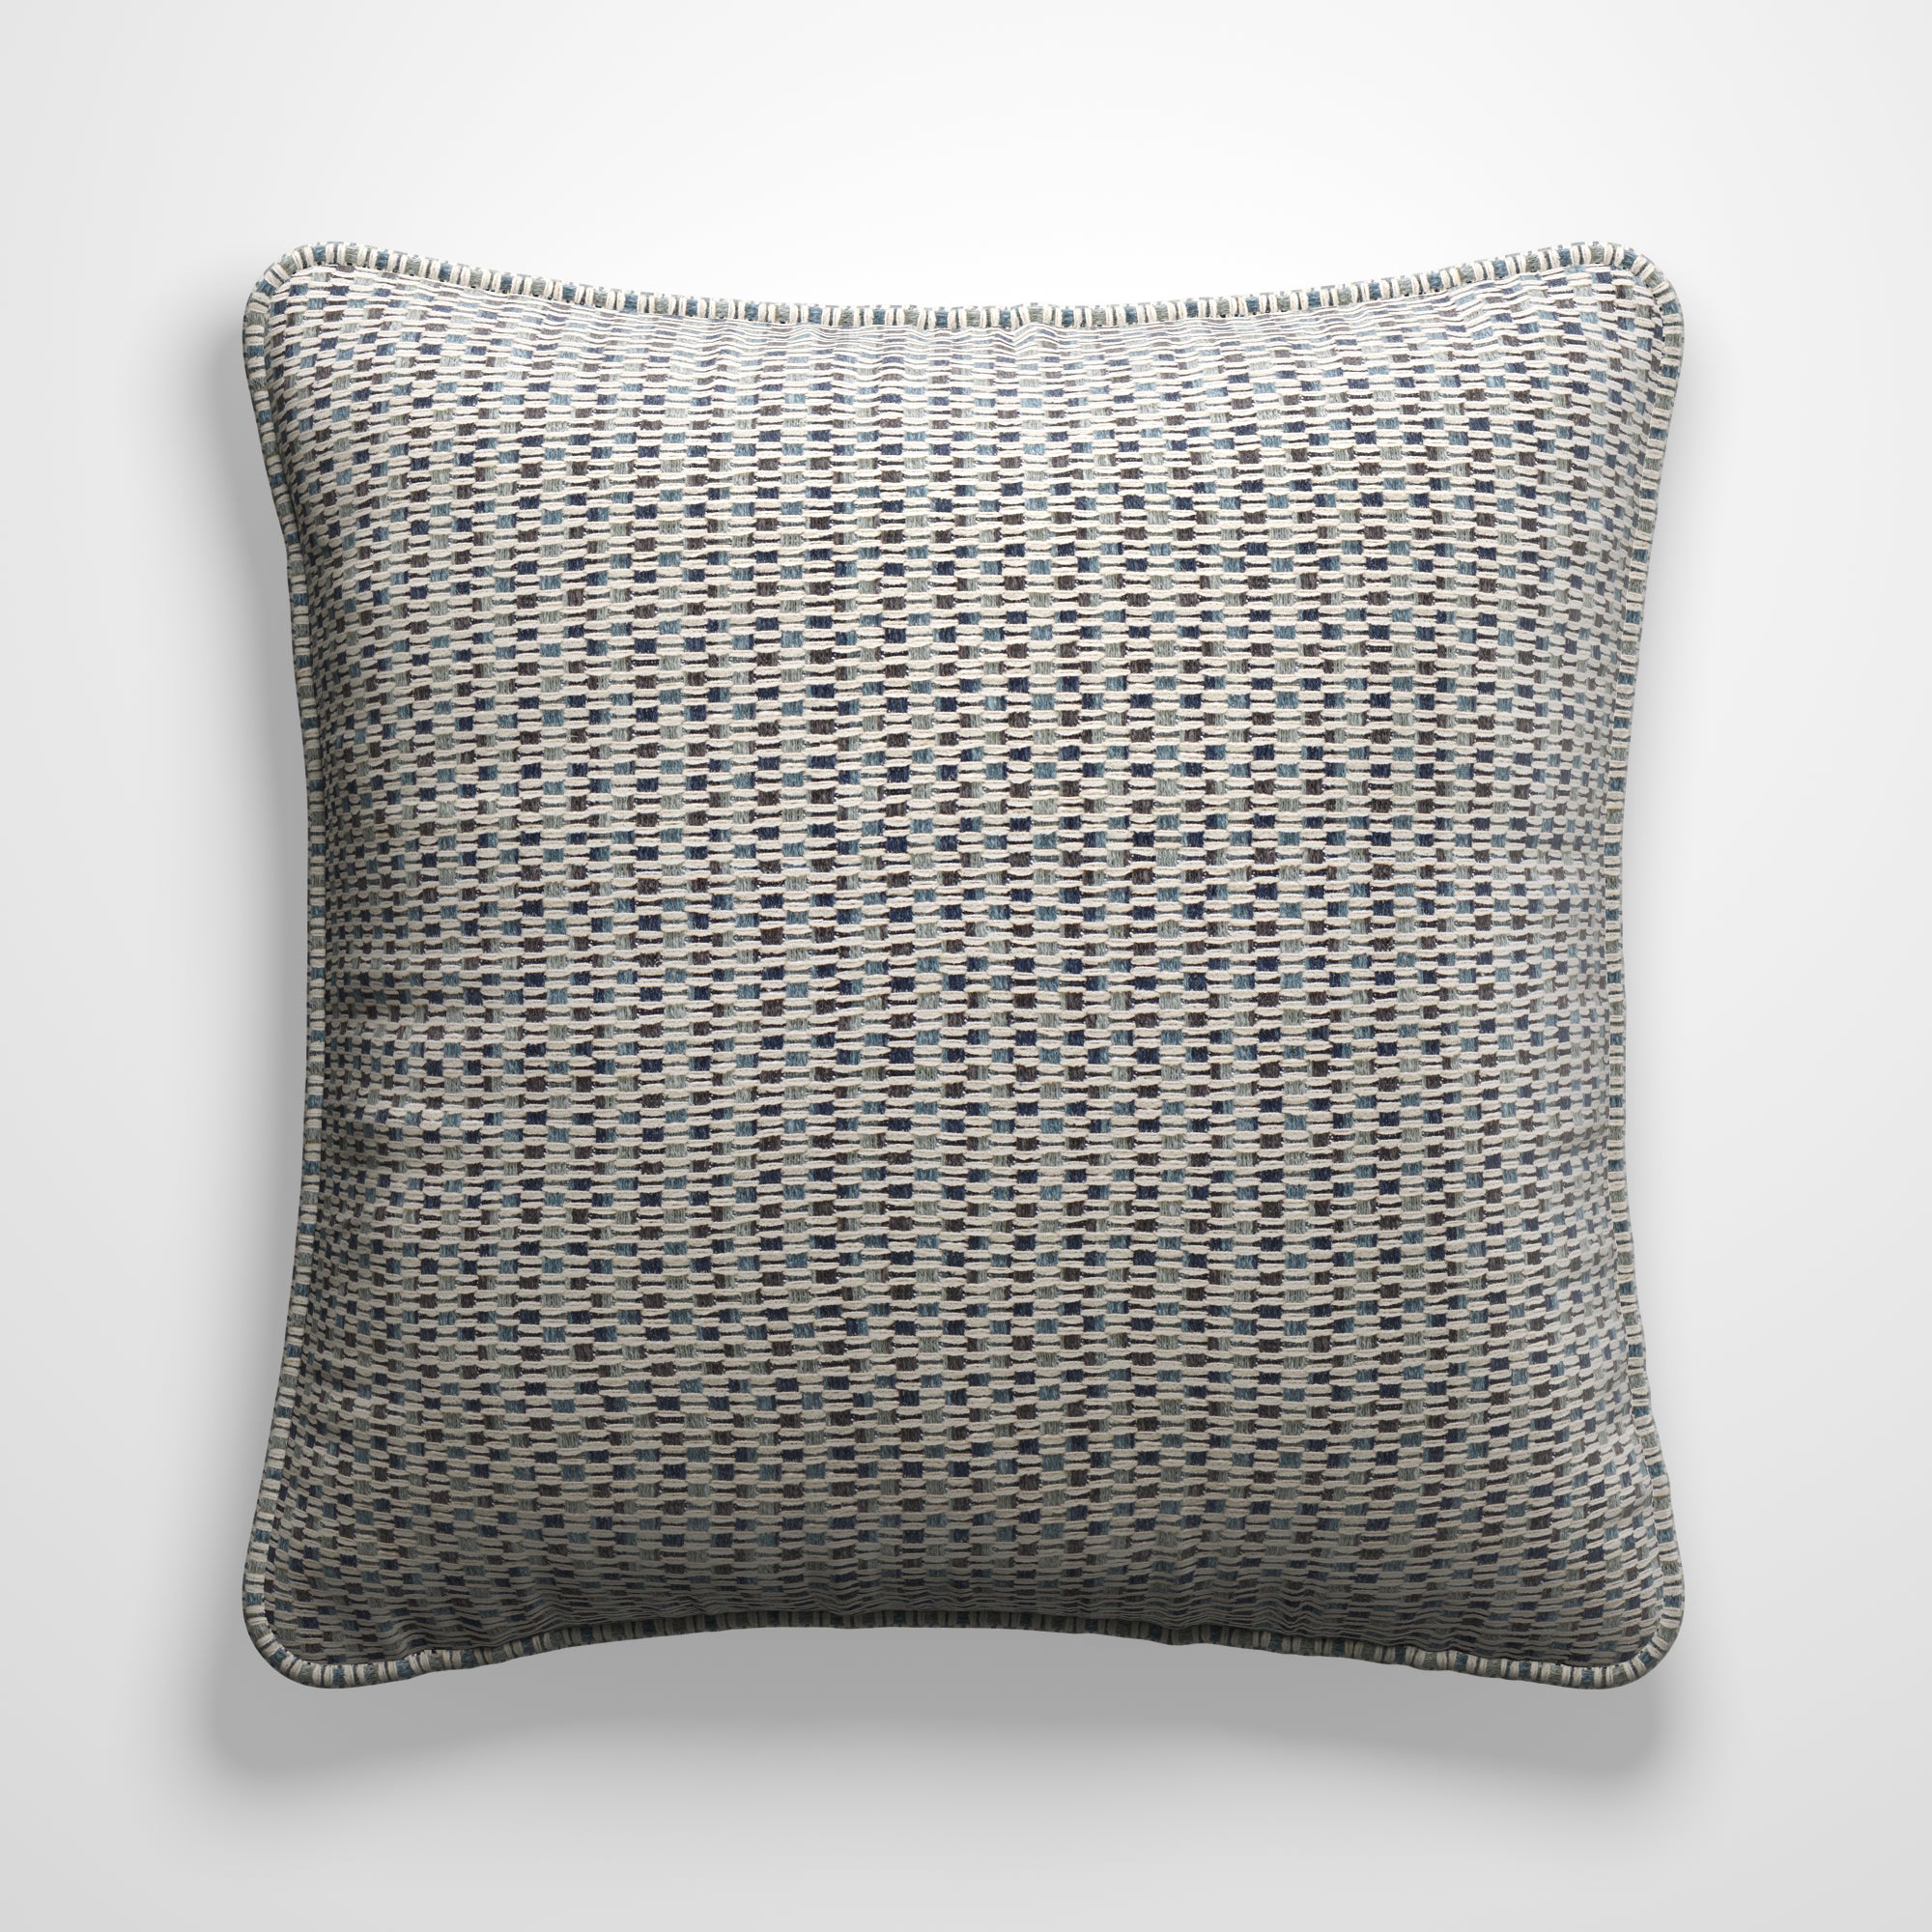 Fairhaven Made to Order Cushion Cover Fairhaven Ashley Blue